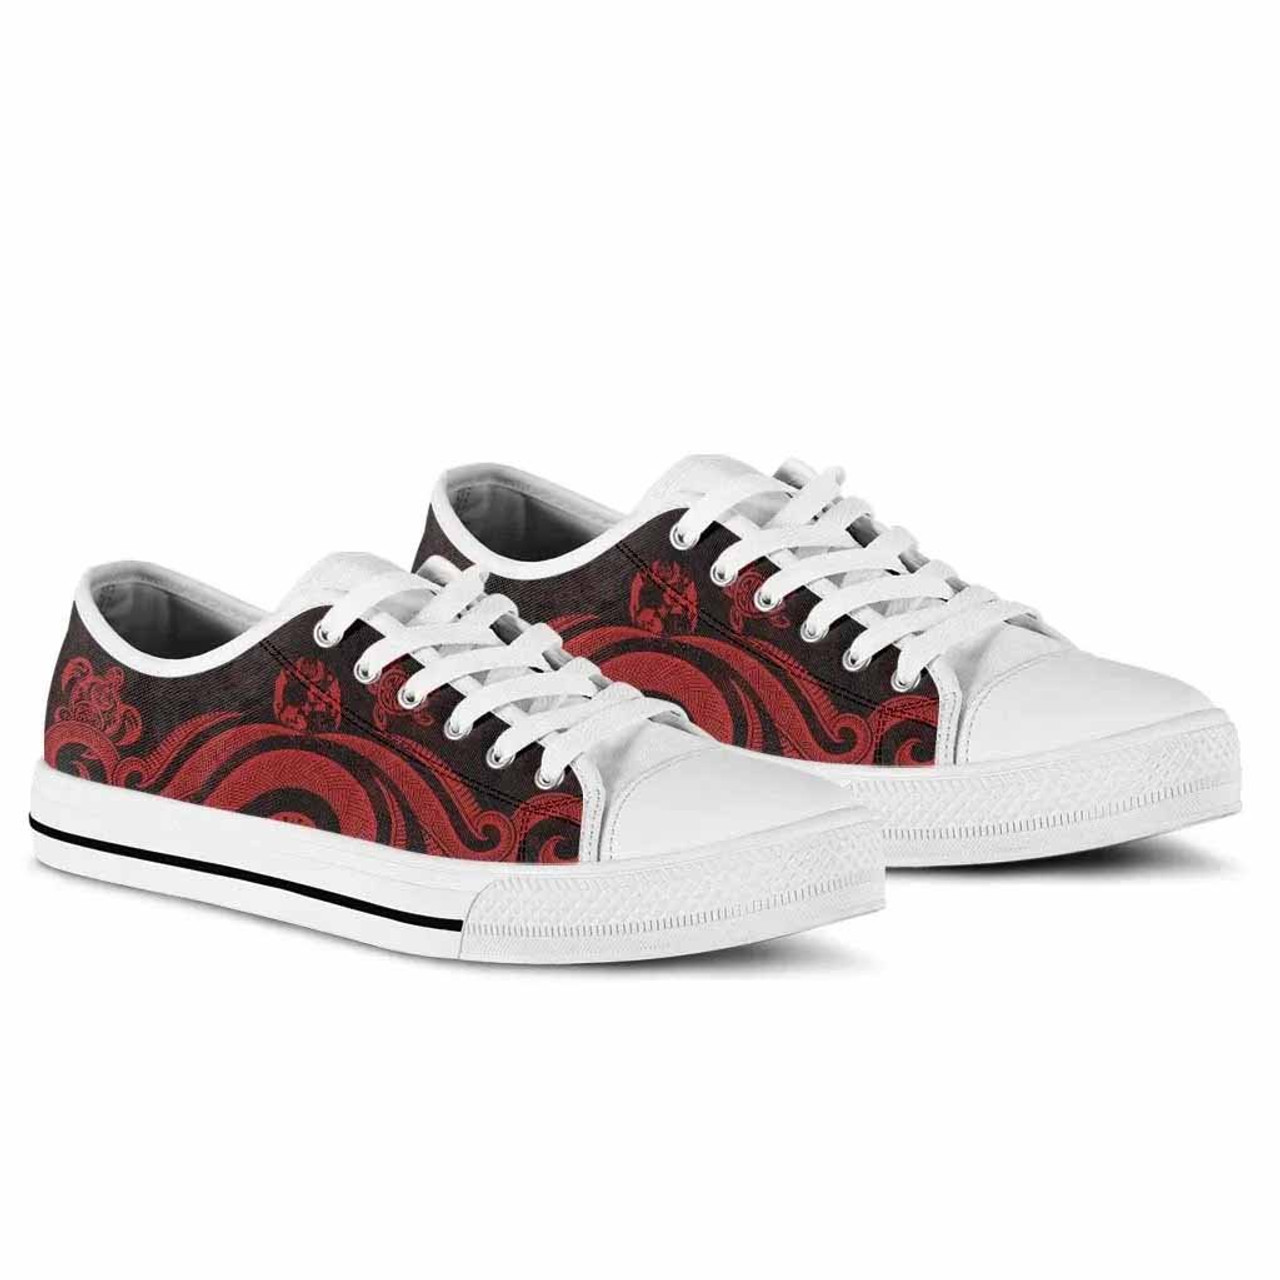 Tonga Low Top Canvas Shoes - Red Tentacle Turtle 7